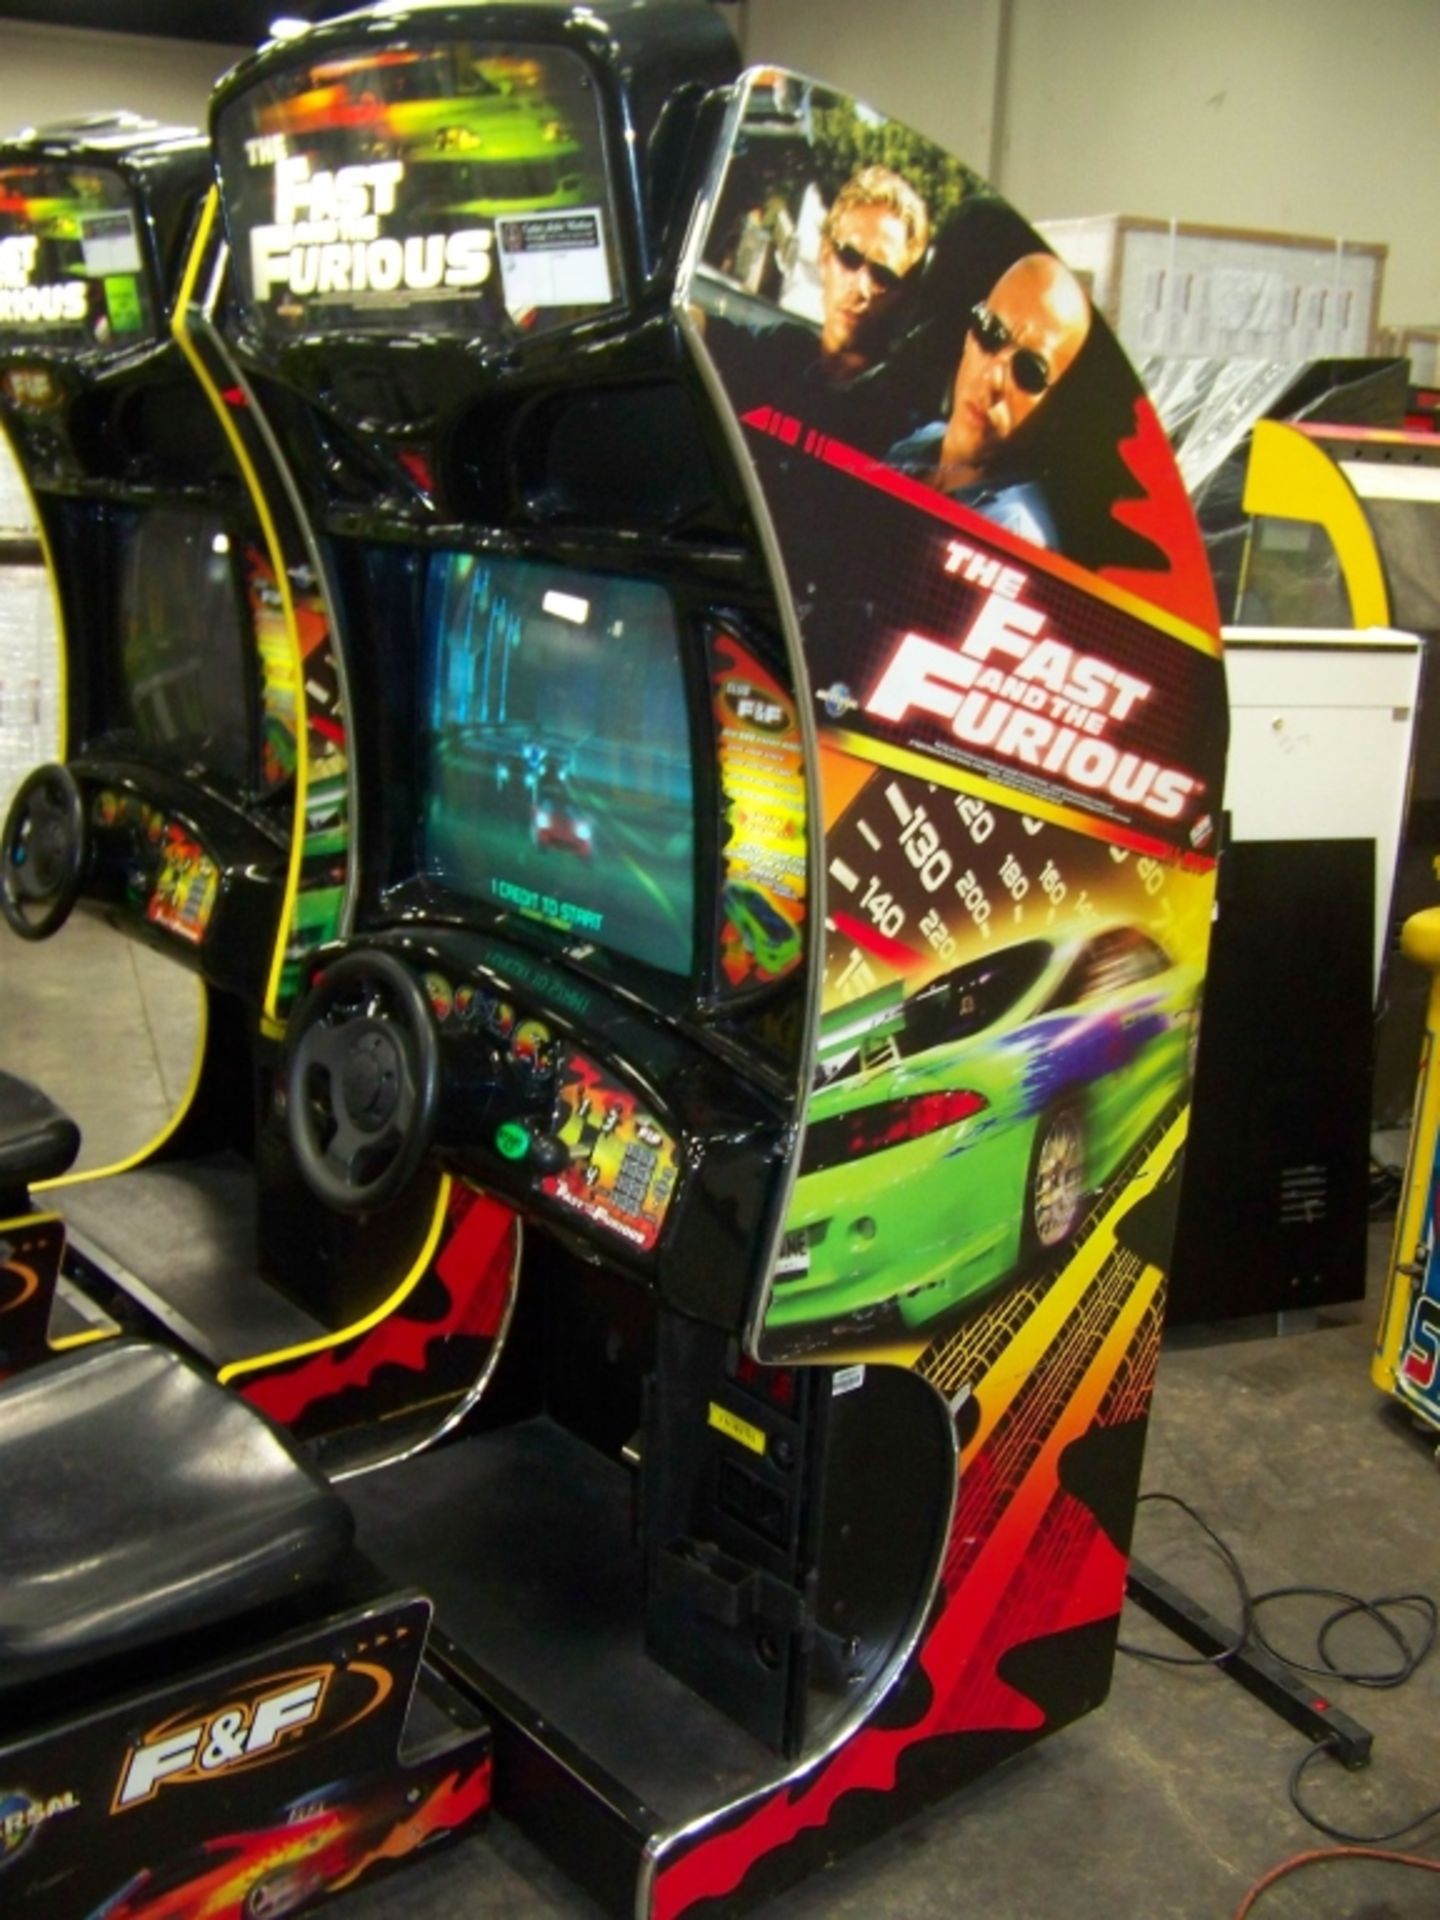 FAST AND FURIOUS DEDICATED RACING ARCADE GAME - Image 6 of 7